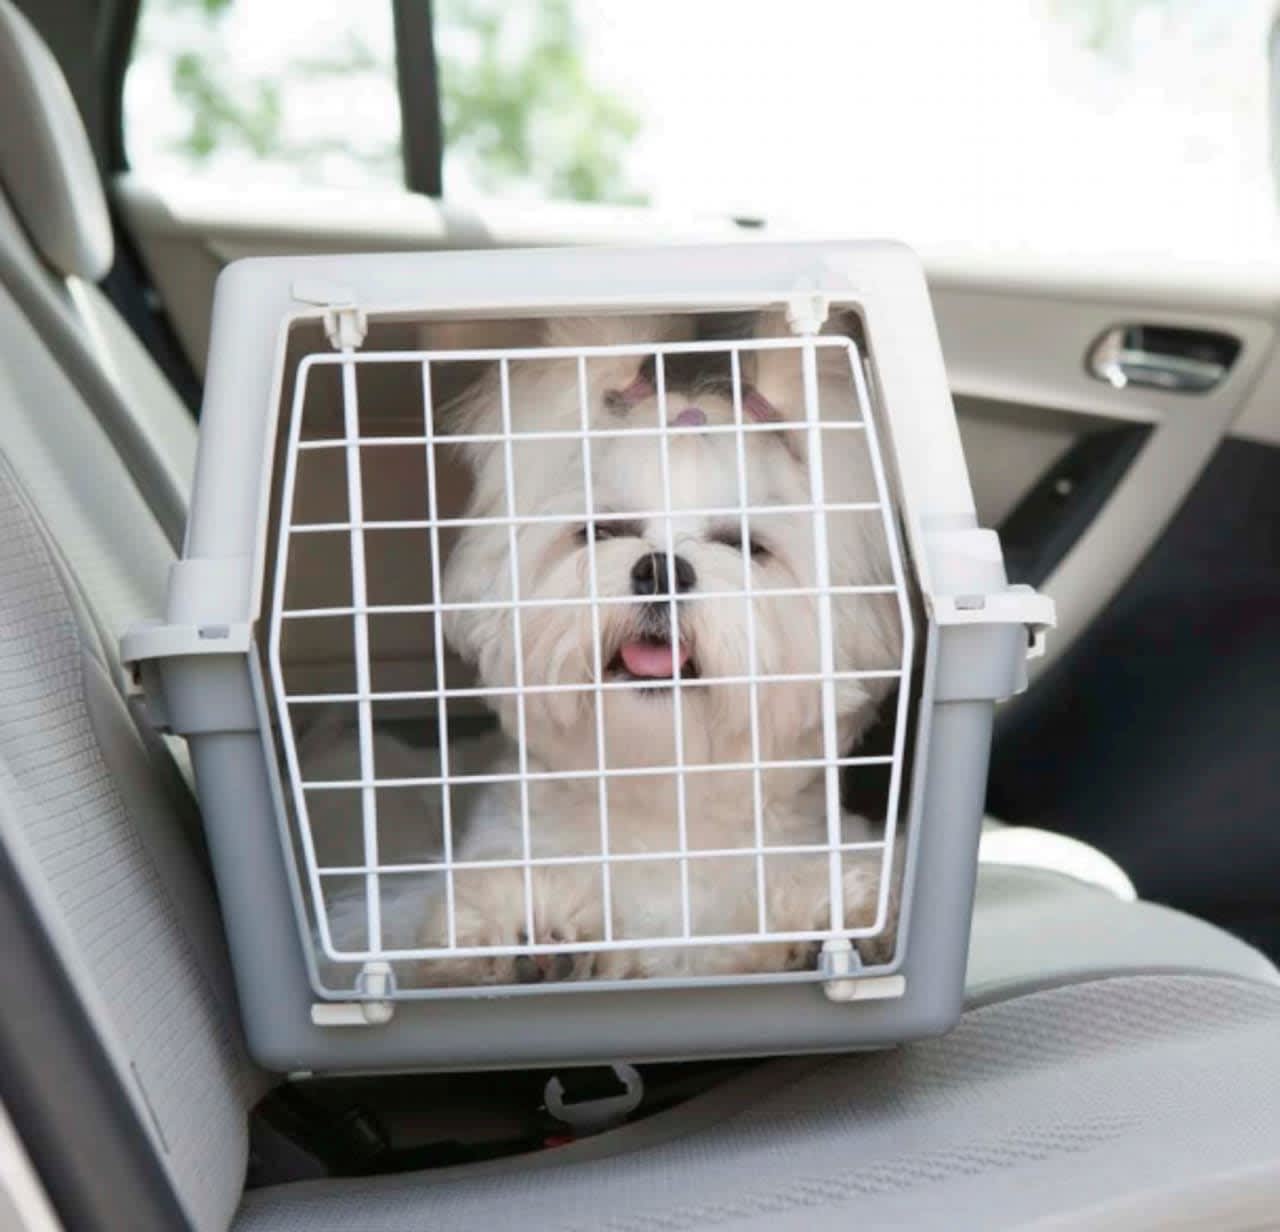 Moving with your dog? Follow these tips for both you and Fido's ease of mind.